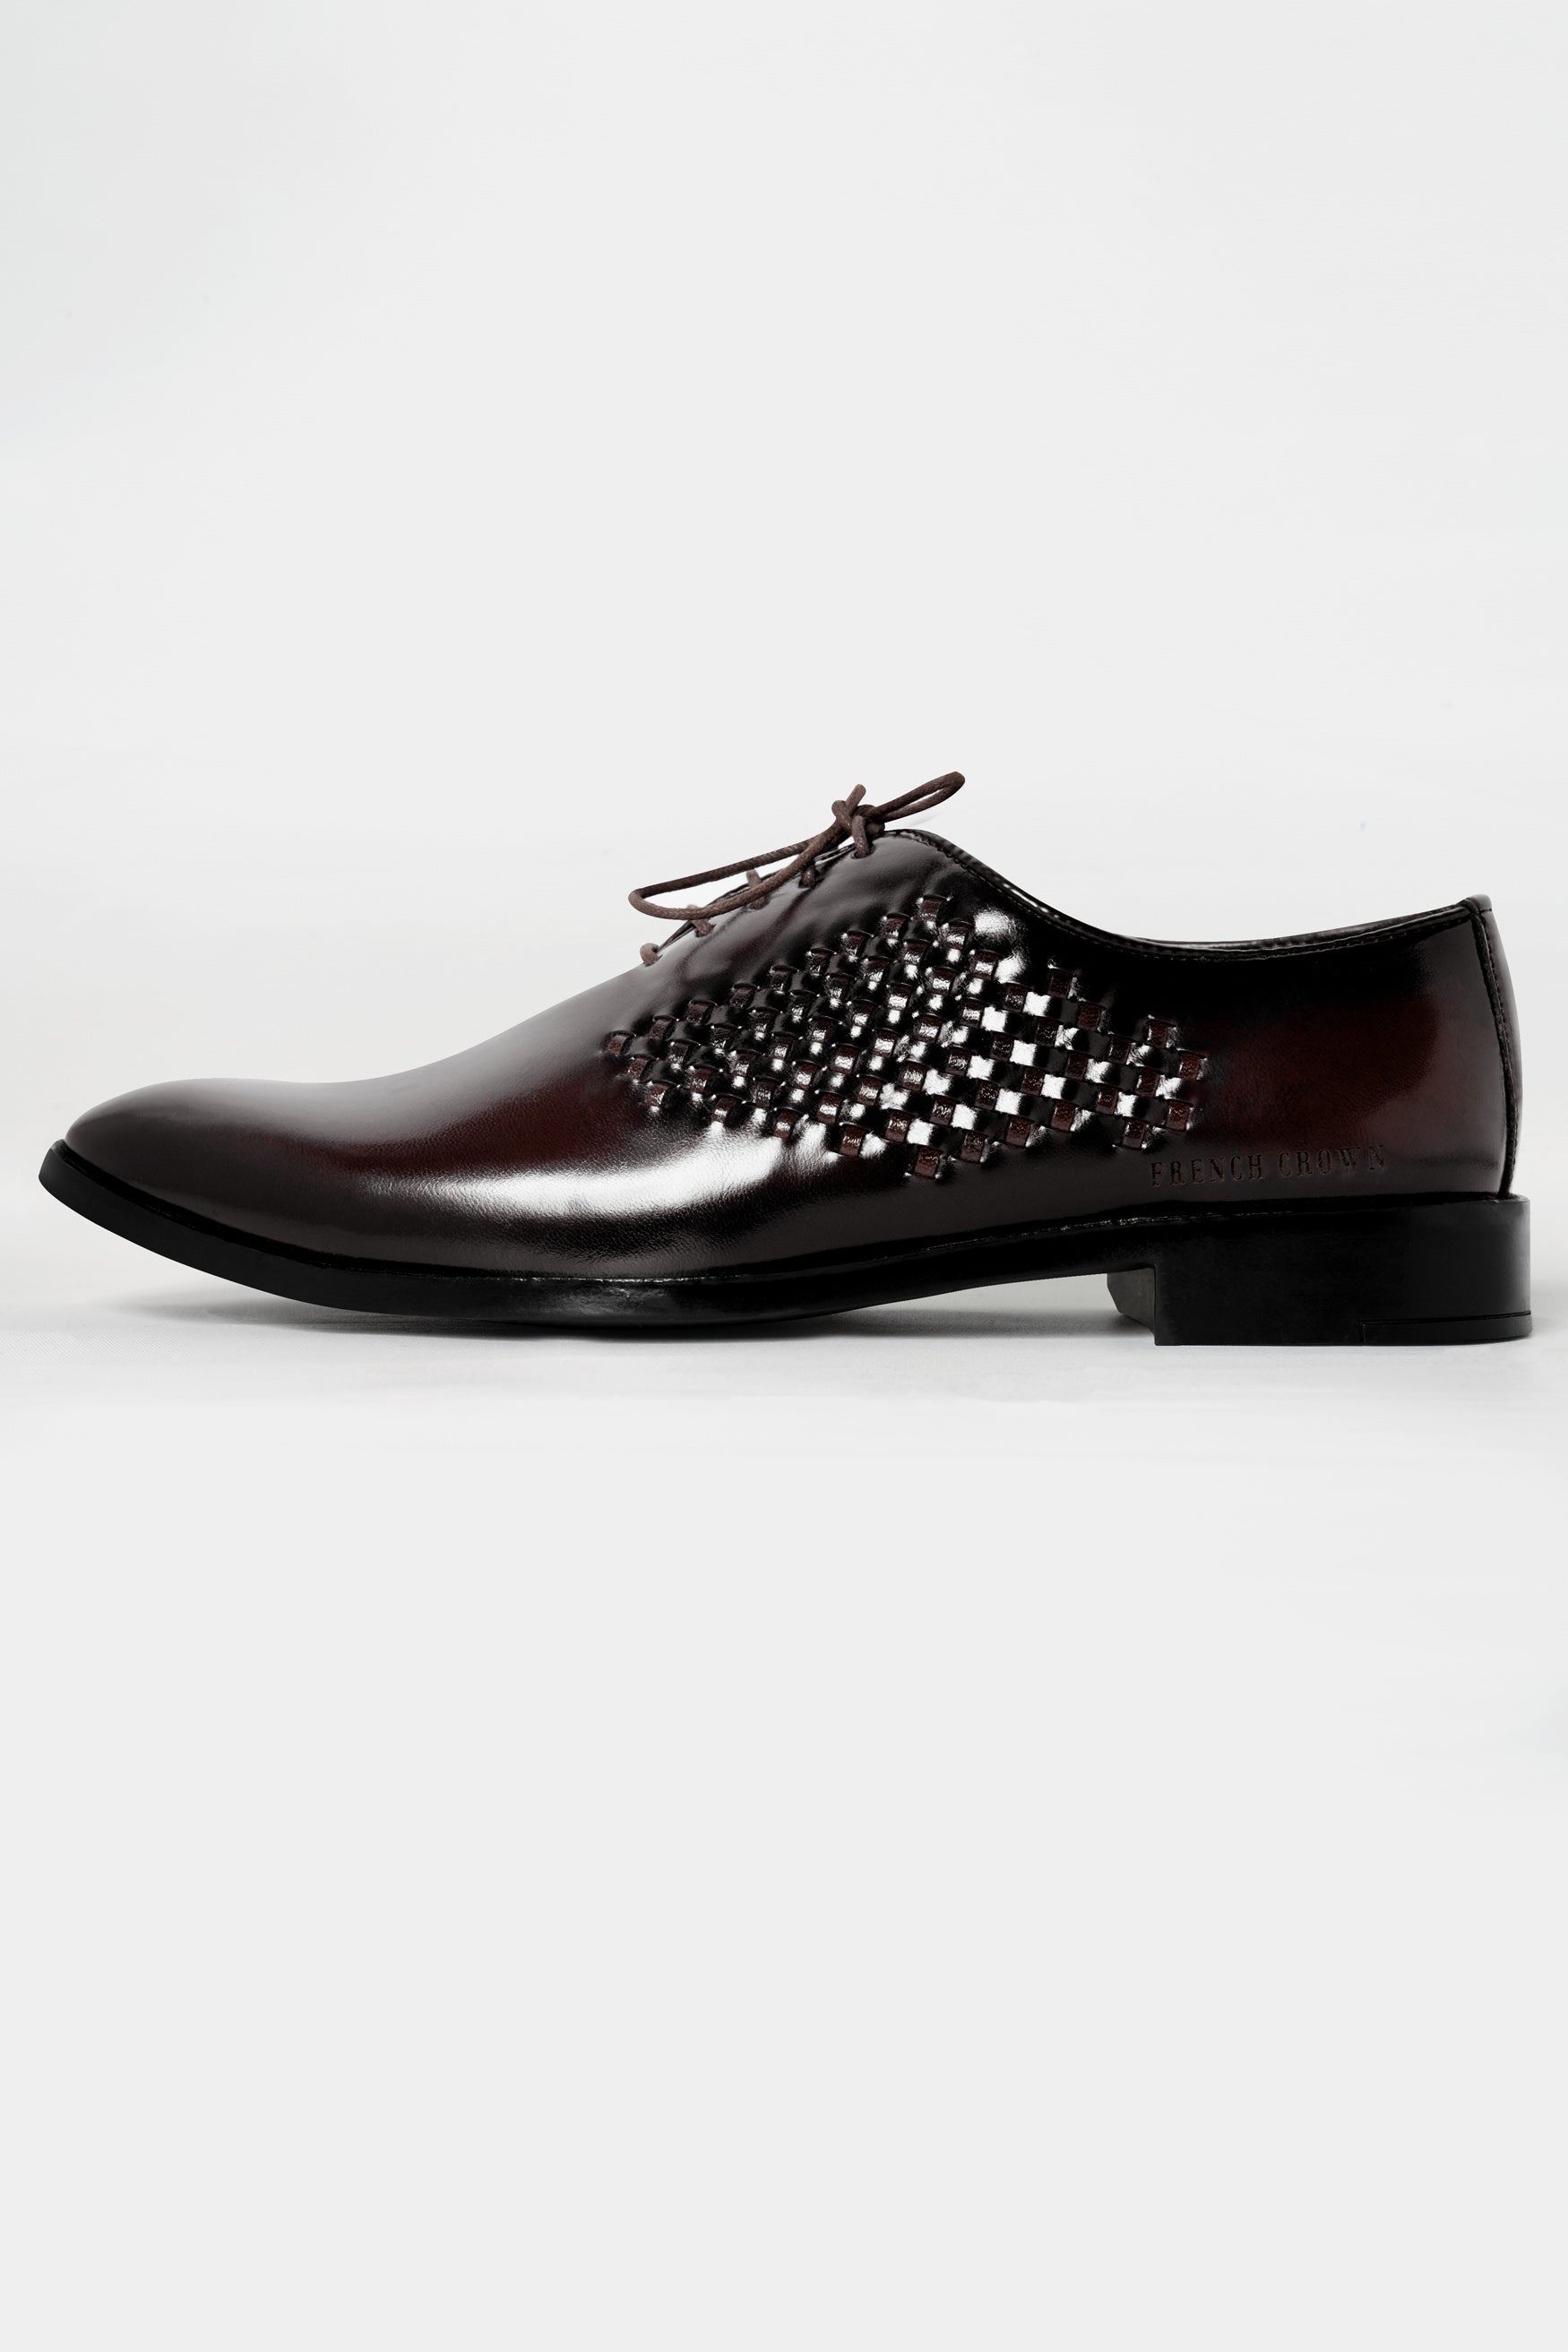 Eclipse Brown Embossed Weave Vegan Leather Oxford Shoes